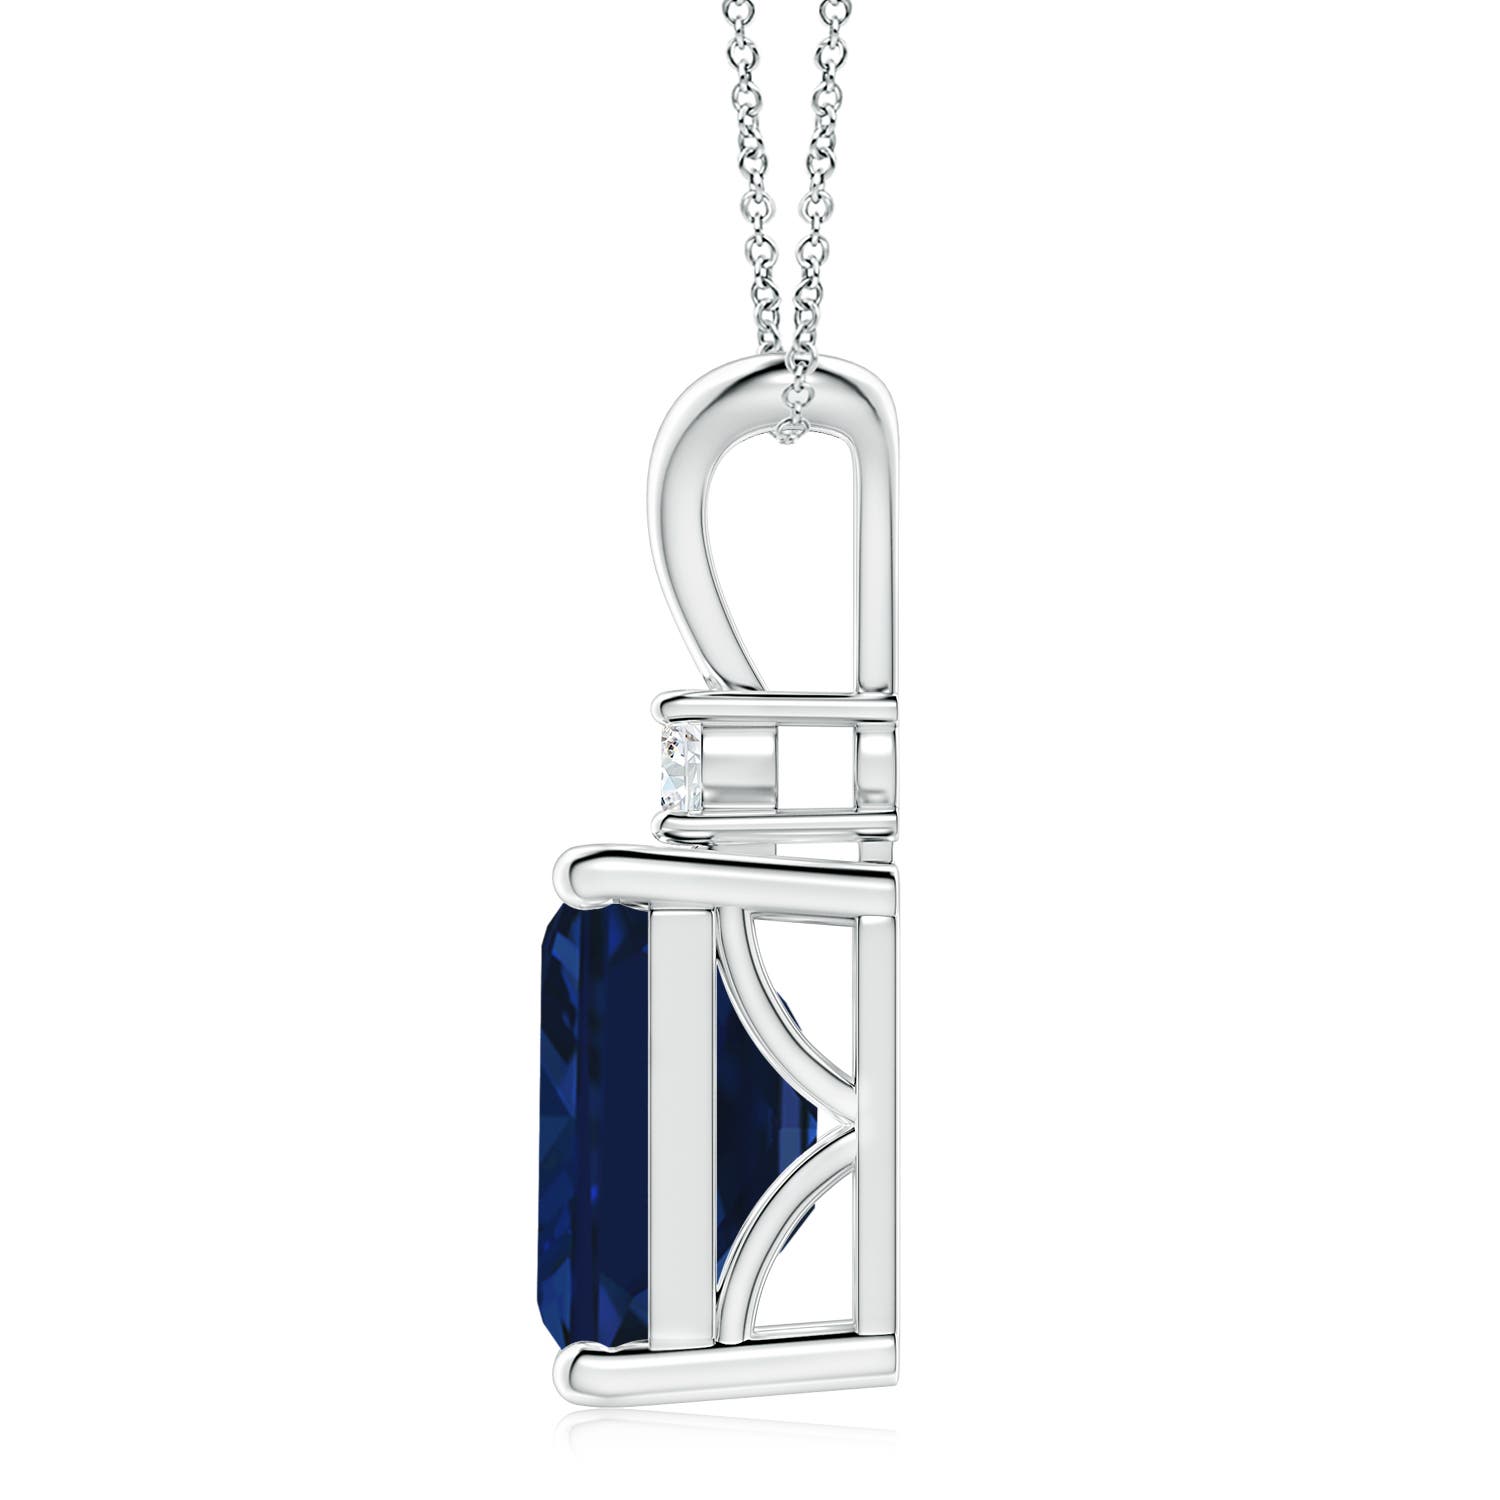 AAA - Blue Sapphire / 5.66 CT / 14 KT White Gold